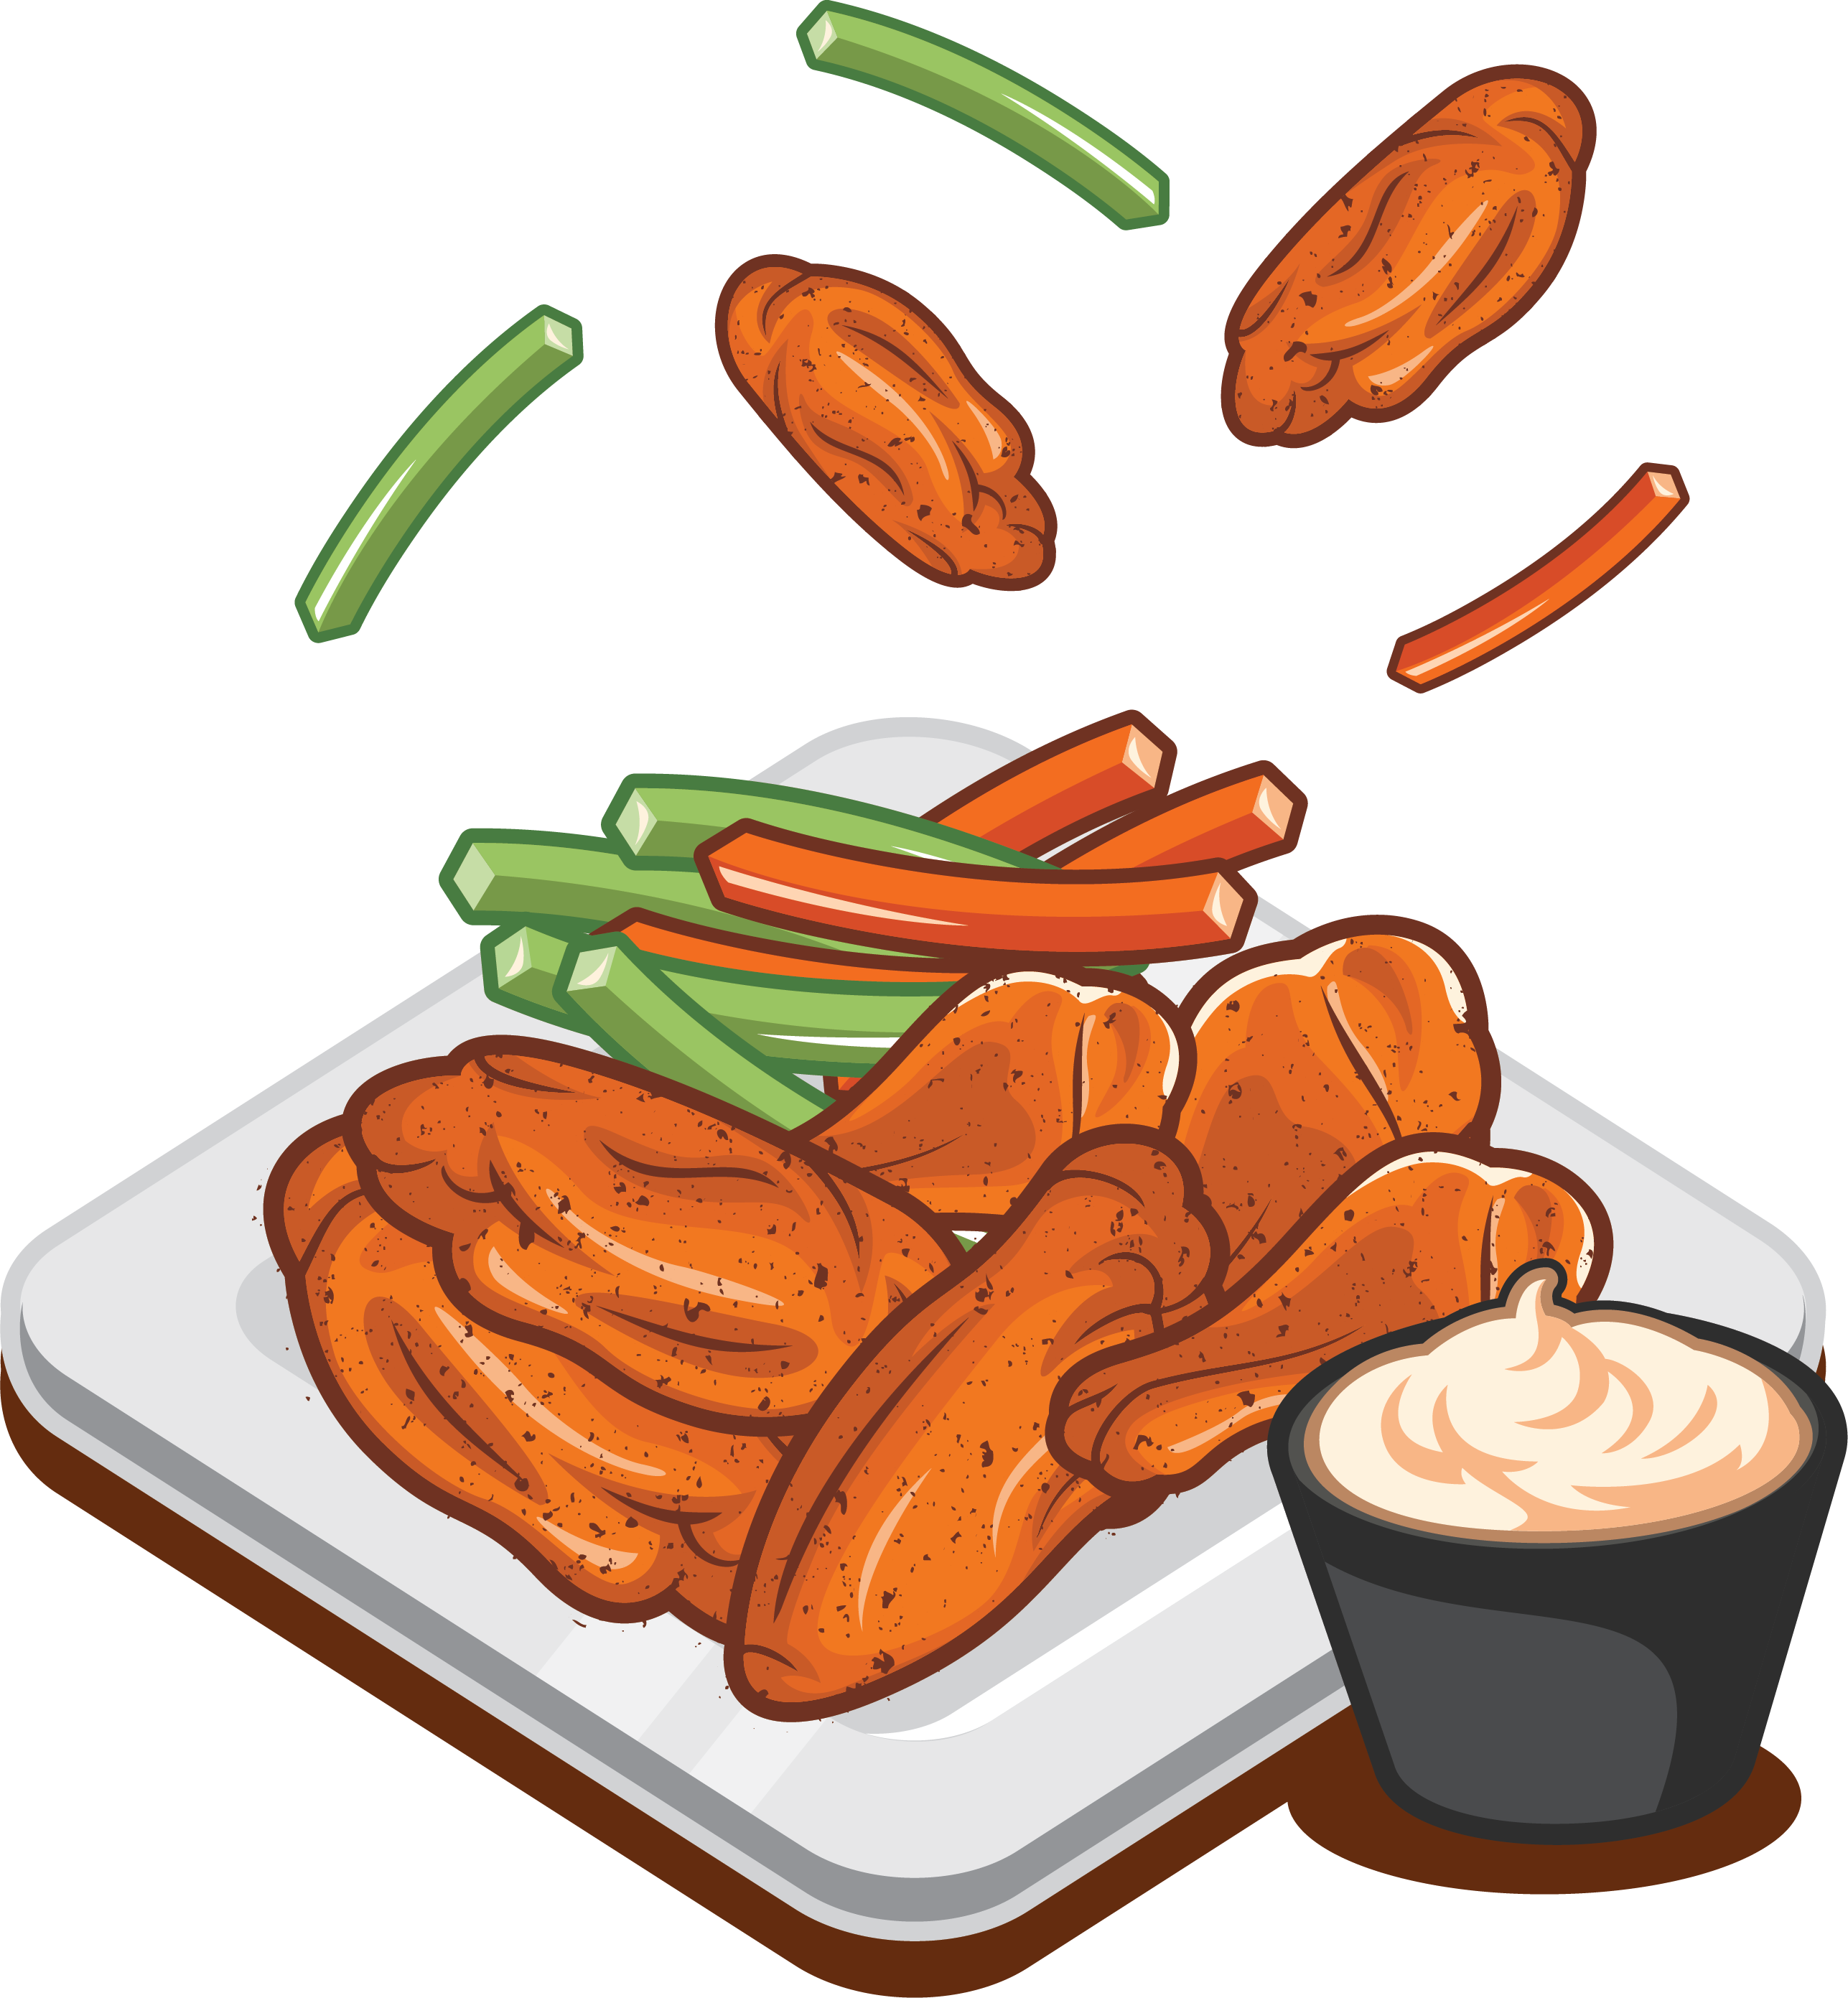 Download and share clipart about Buffalo Wing Sausage Fried Chicken Fast Fo...